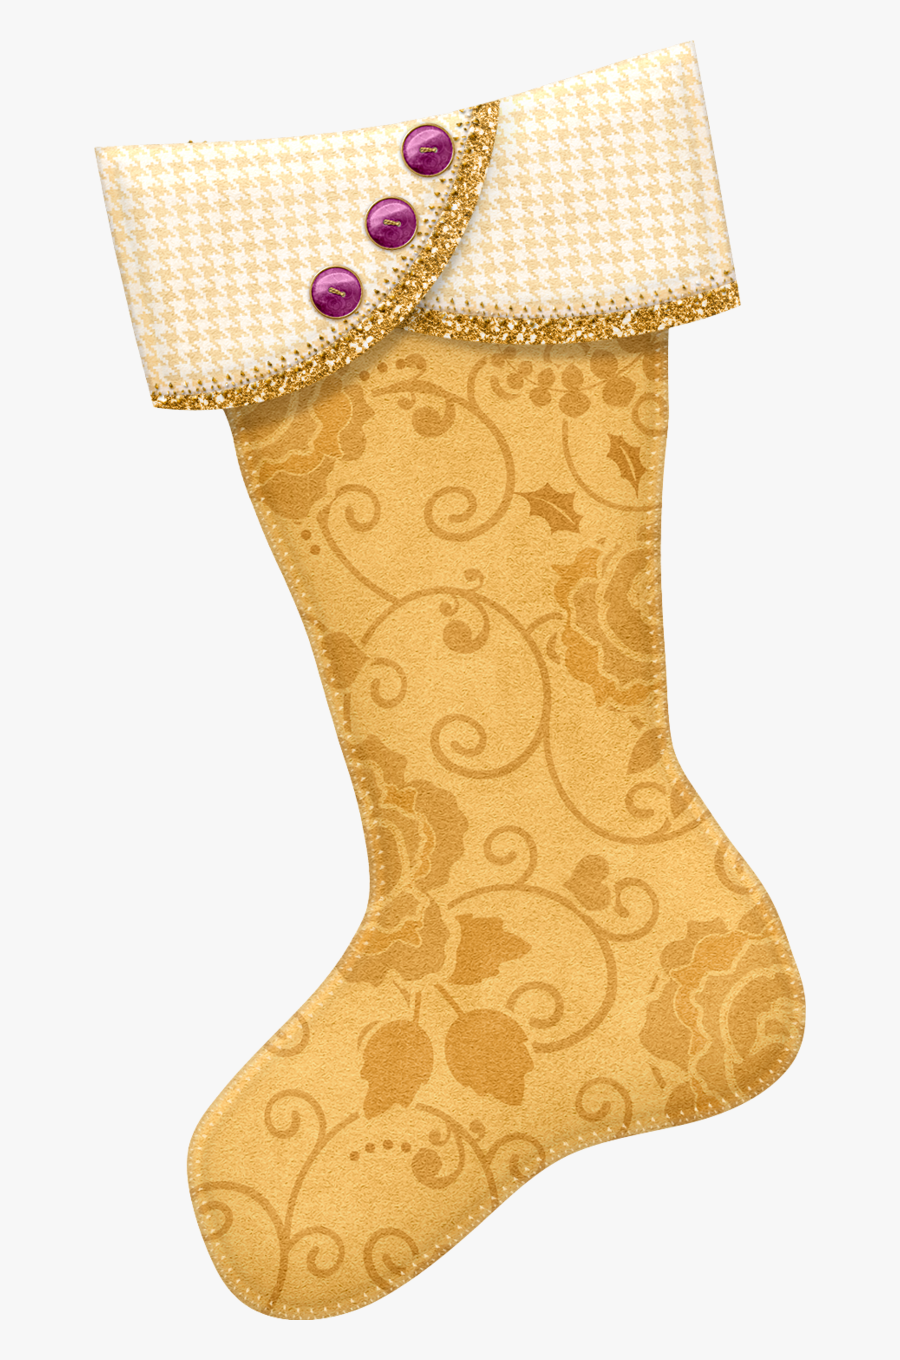 Gold Christmas Stocking Png, Transparent Clipart